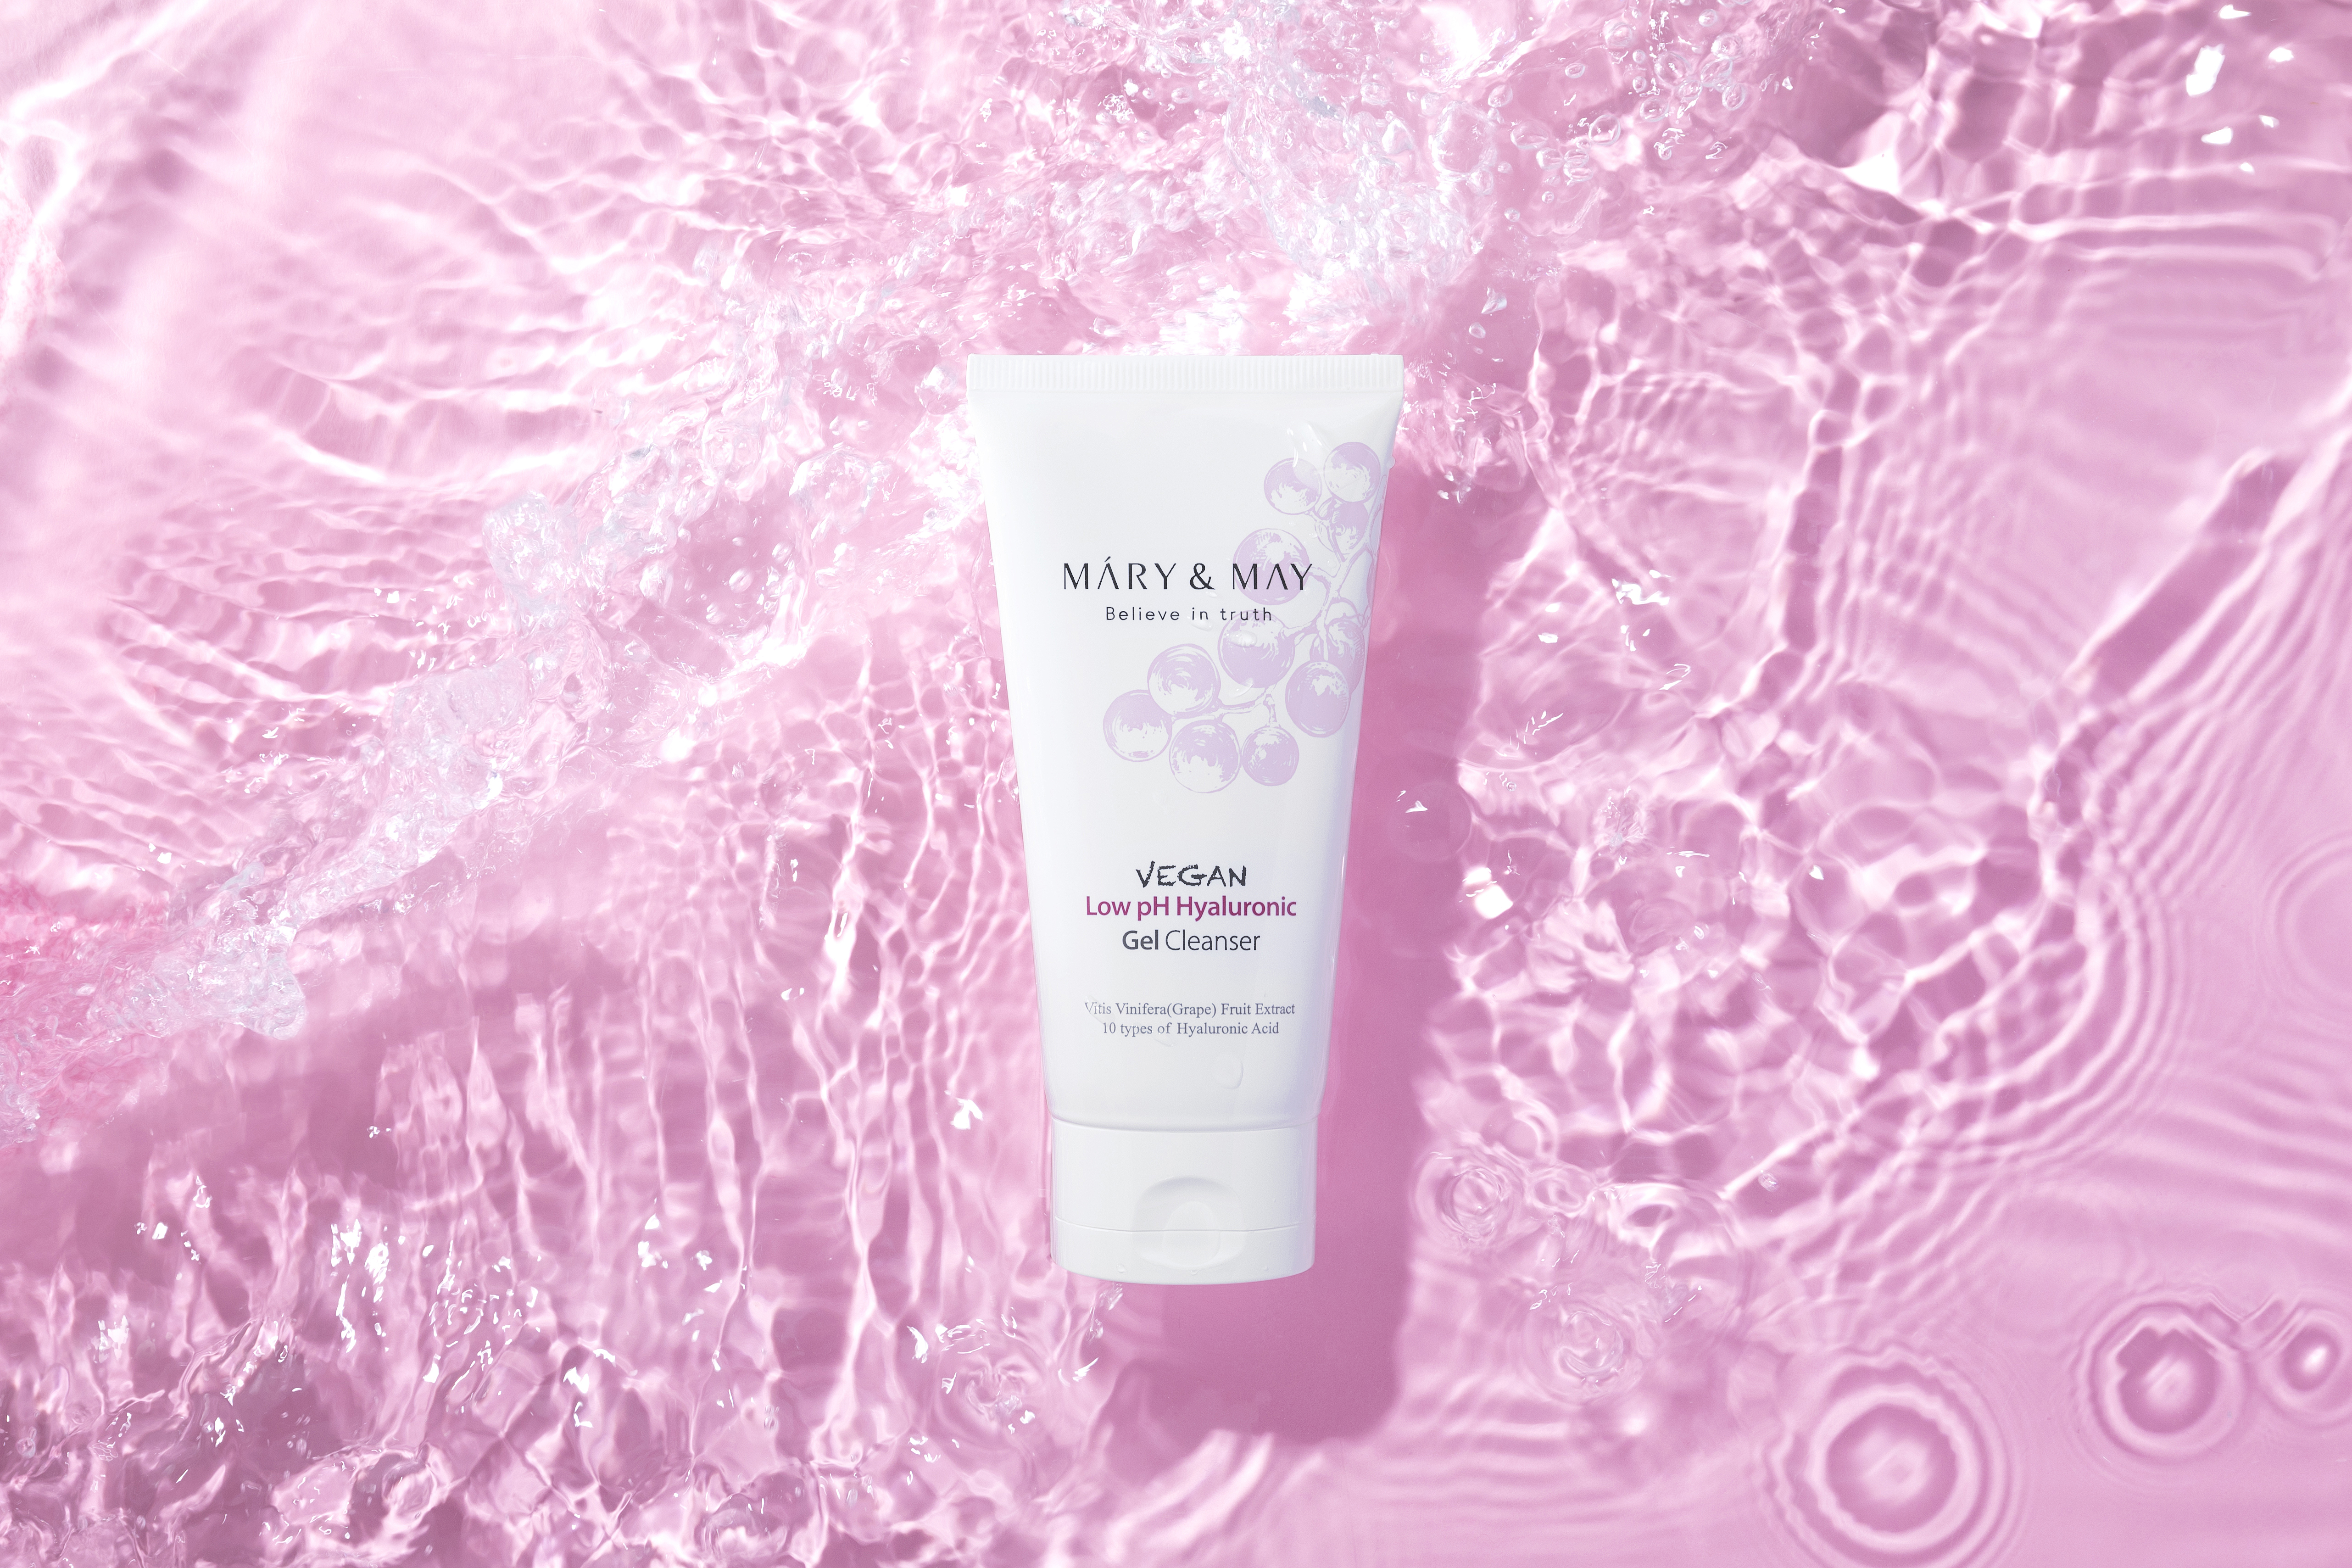 skincare-kbeauty-glowtime-mary & may vegan low ph hyaluronic gel cleanser